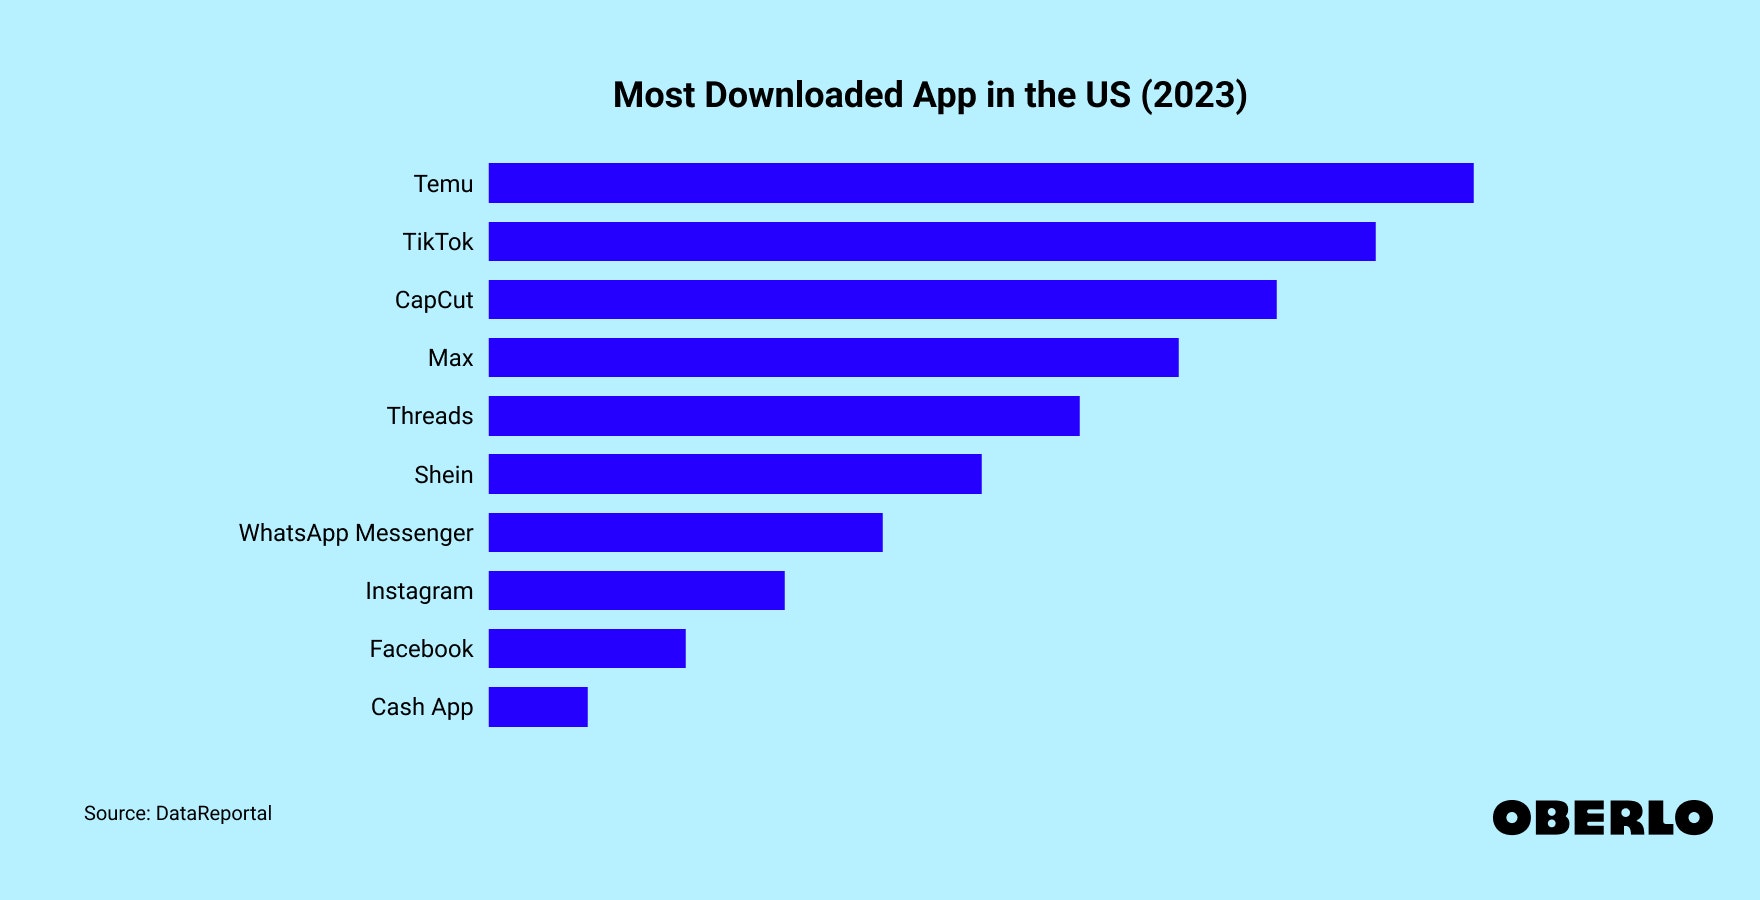 Chart showing the Most Downloaded App in the US